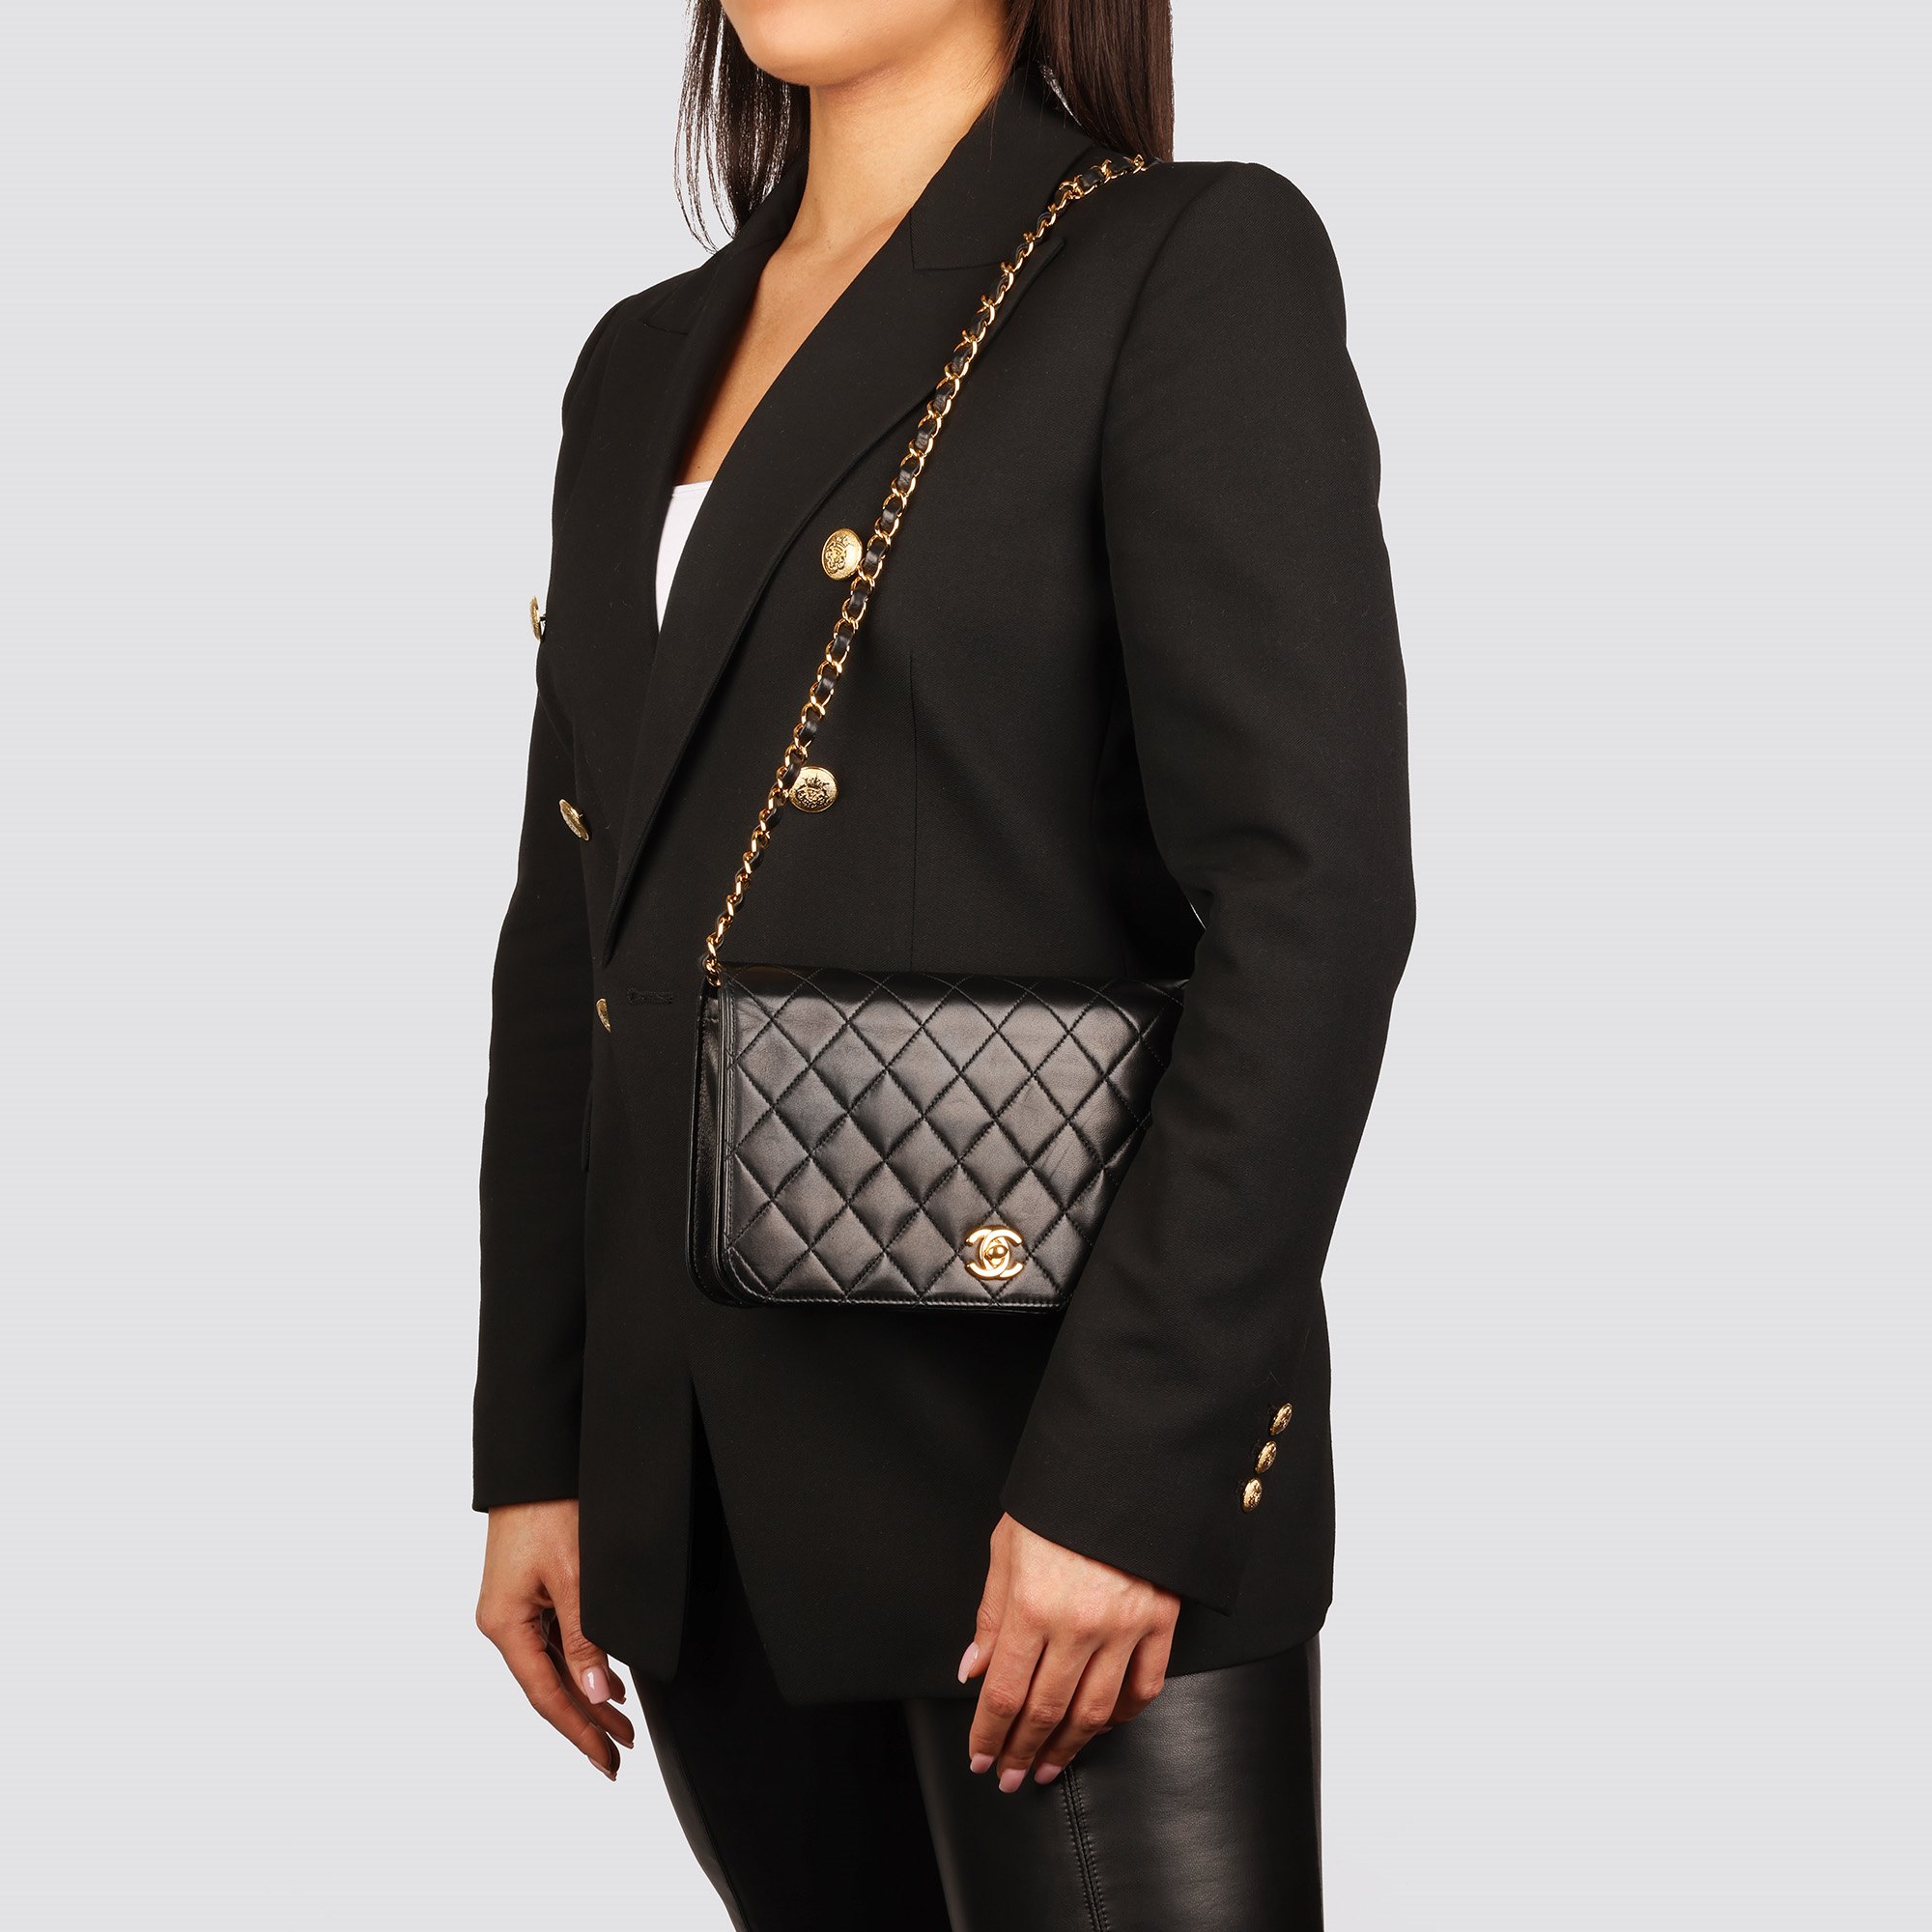 Chanel Black Quilted Lambskin Small Classic Single Full Flap Bag